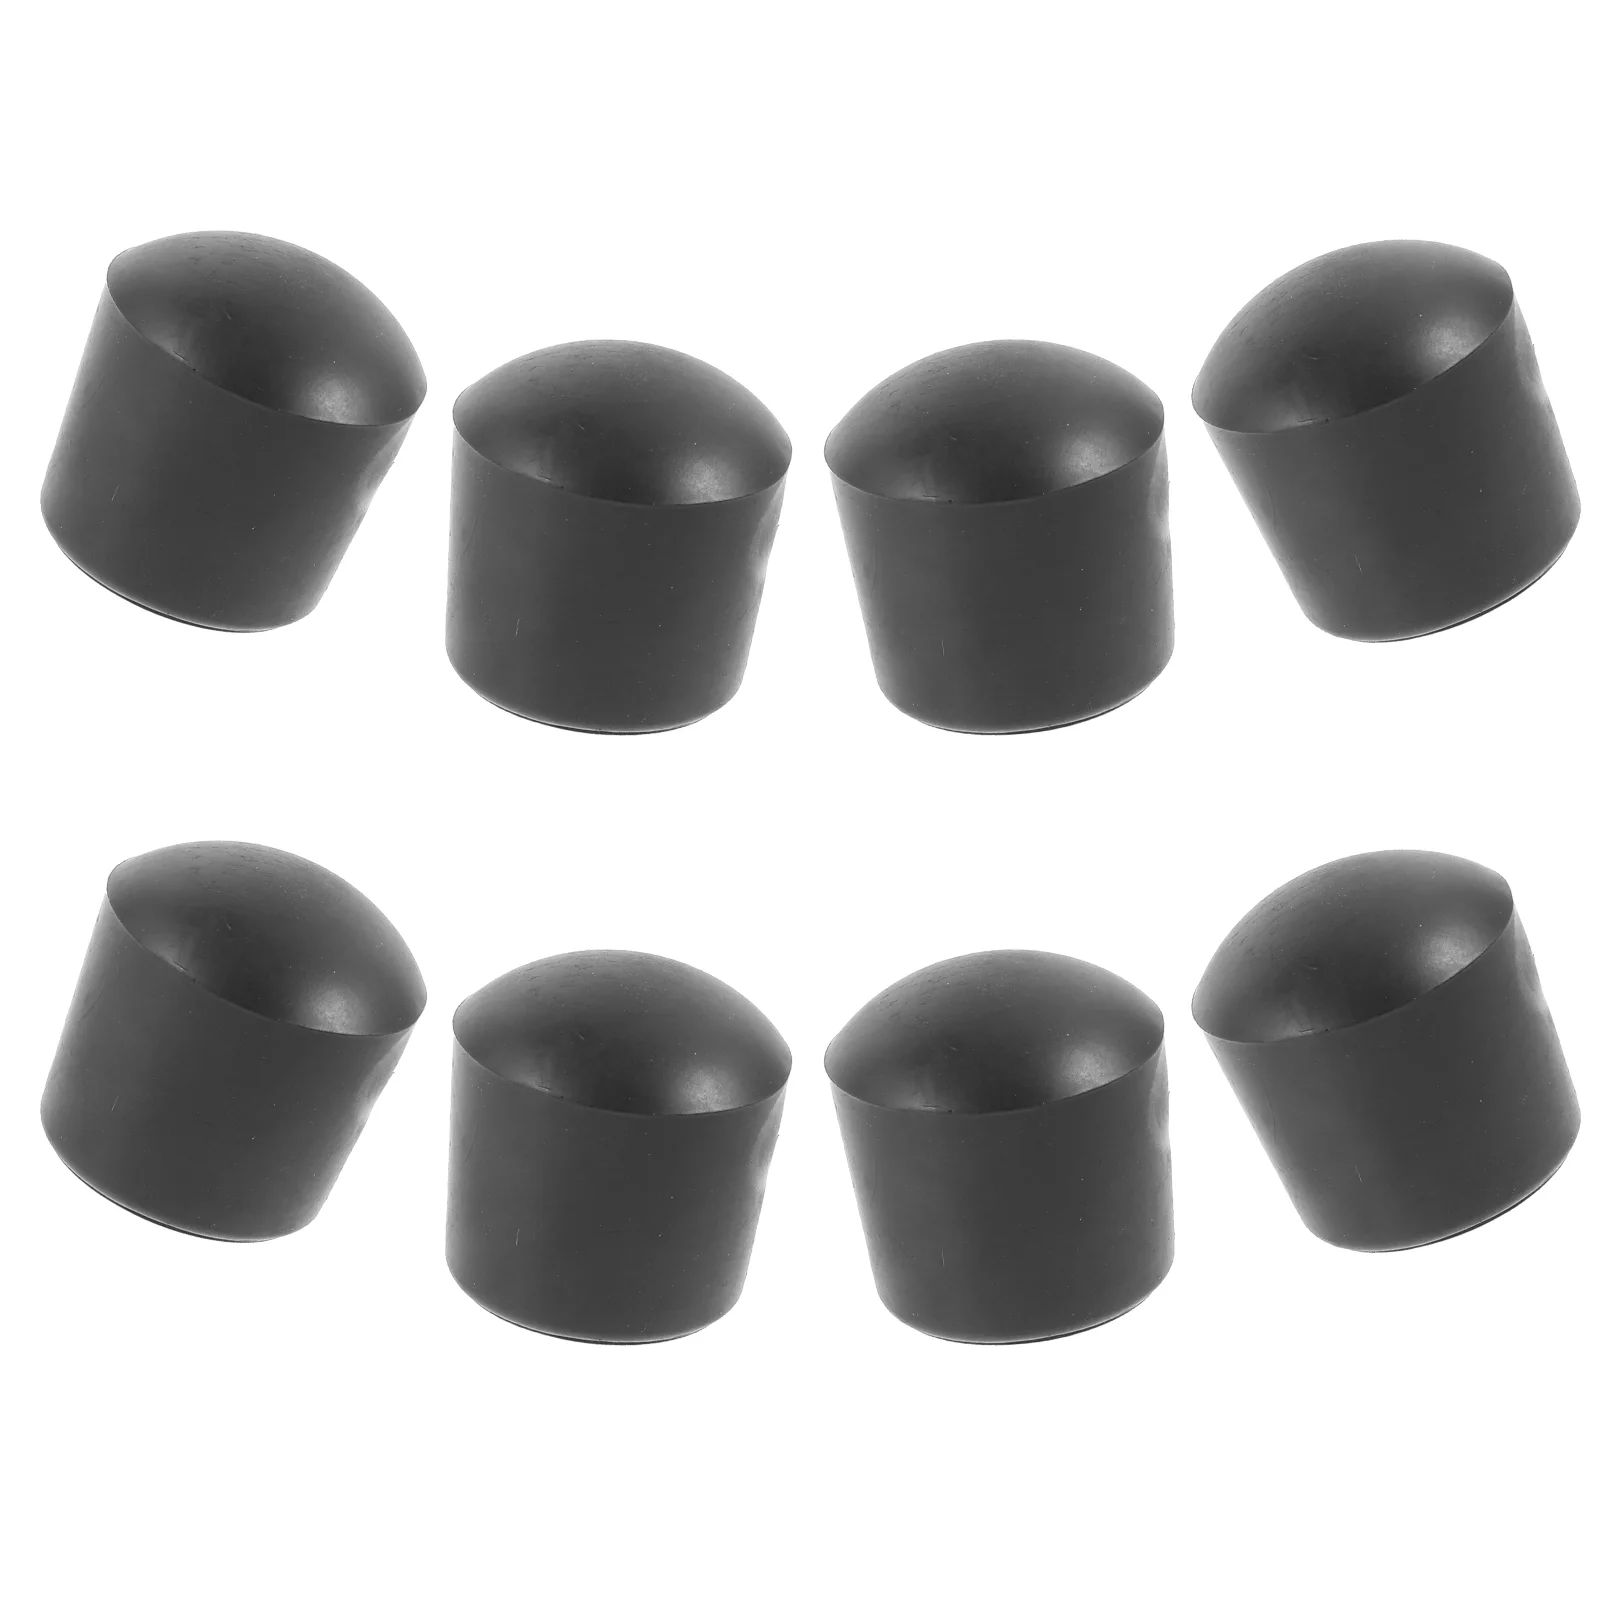 8pcs Foosball Safety End Caps Post Cover Football Table Tip Protectors 8pcs soft leather door panel cover for honda civic 10th gen 2016 2017 car interior door armrest panel cover surface sticker trim